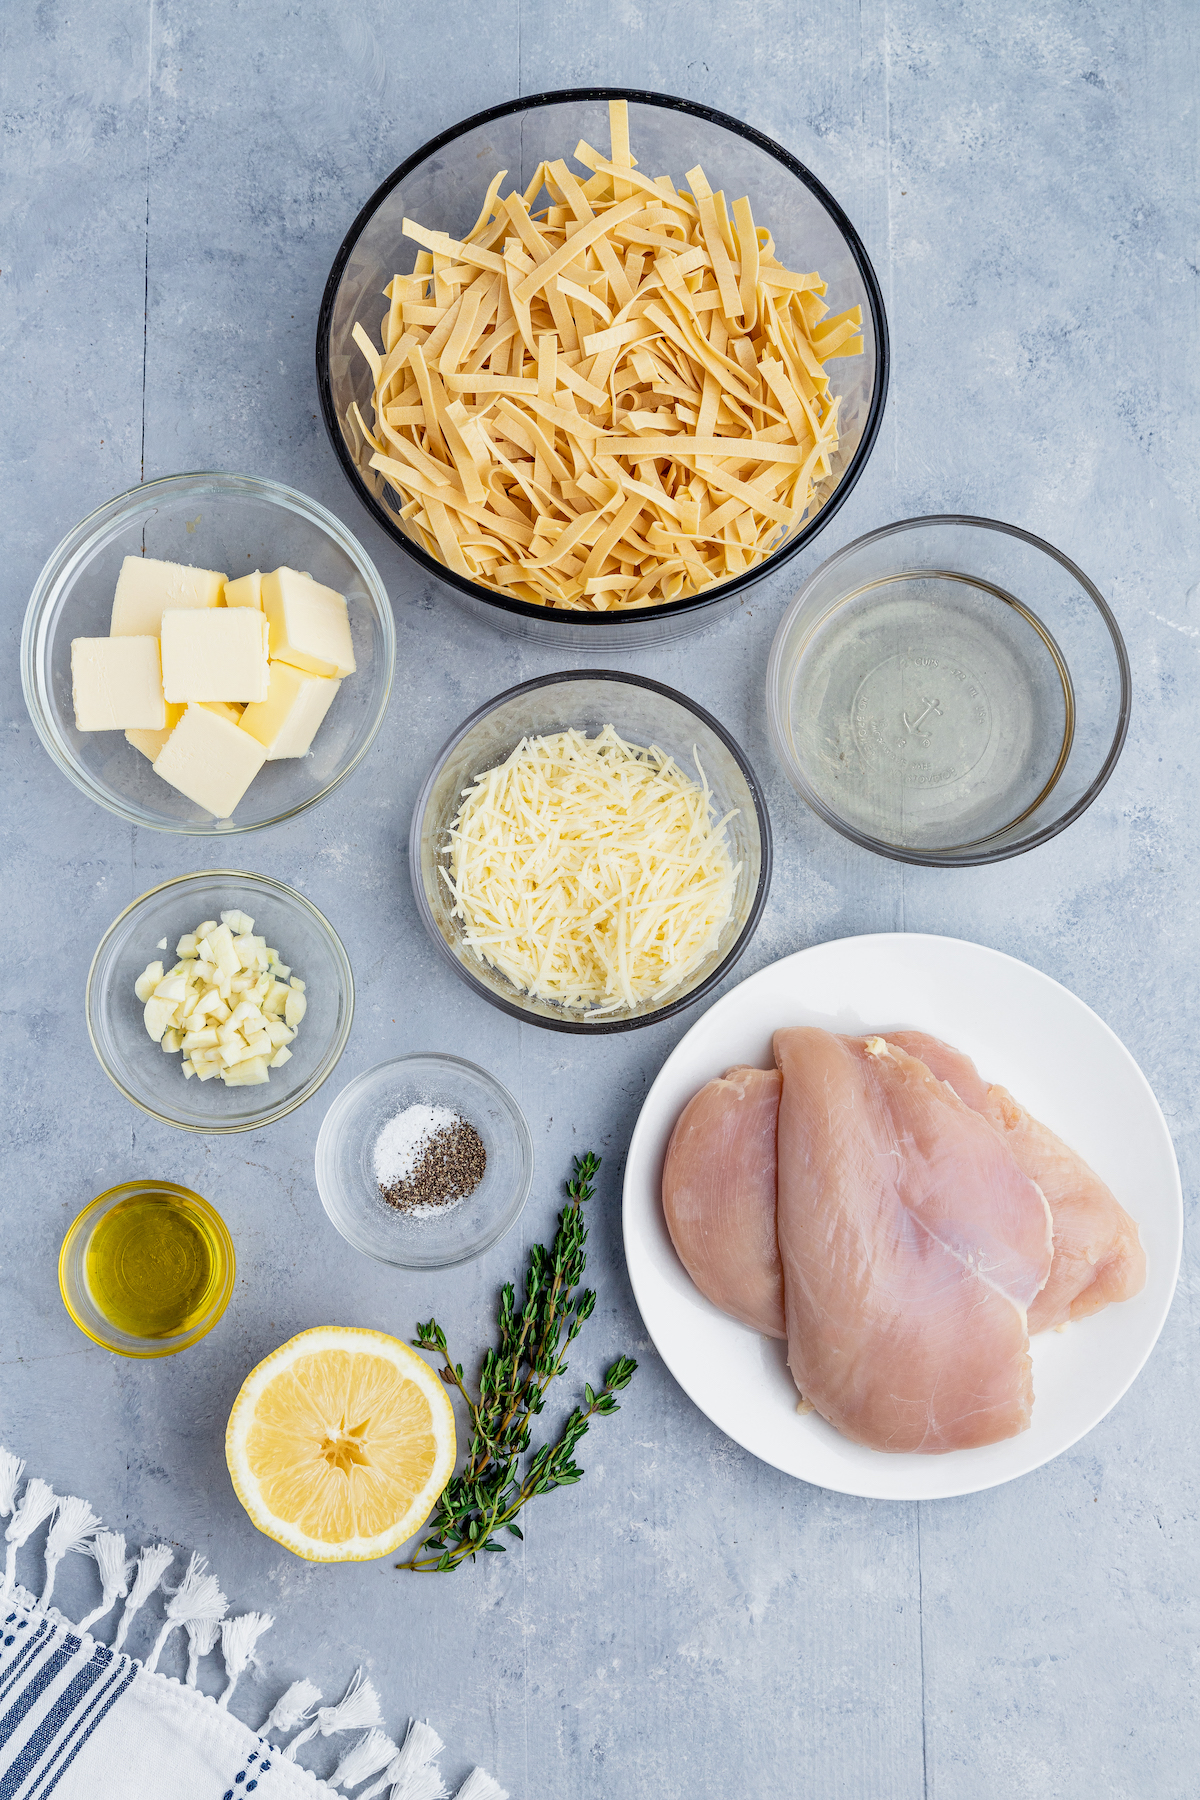 The ingredients for lemon thyme chicken pasta.